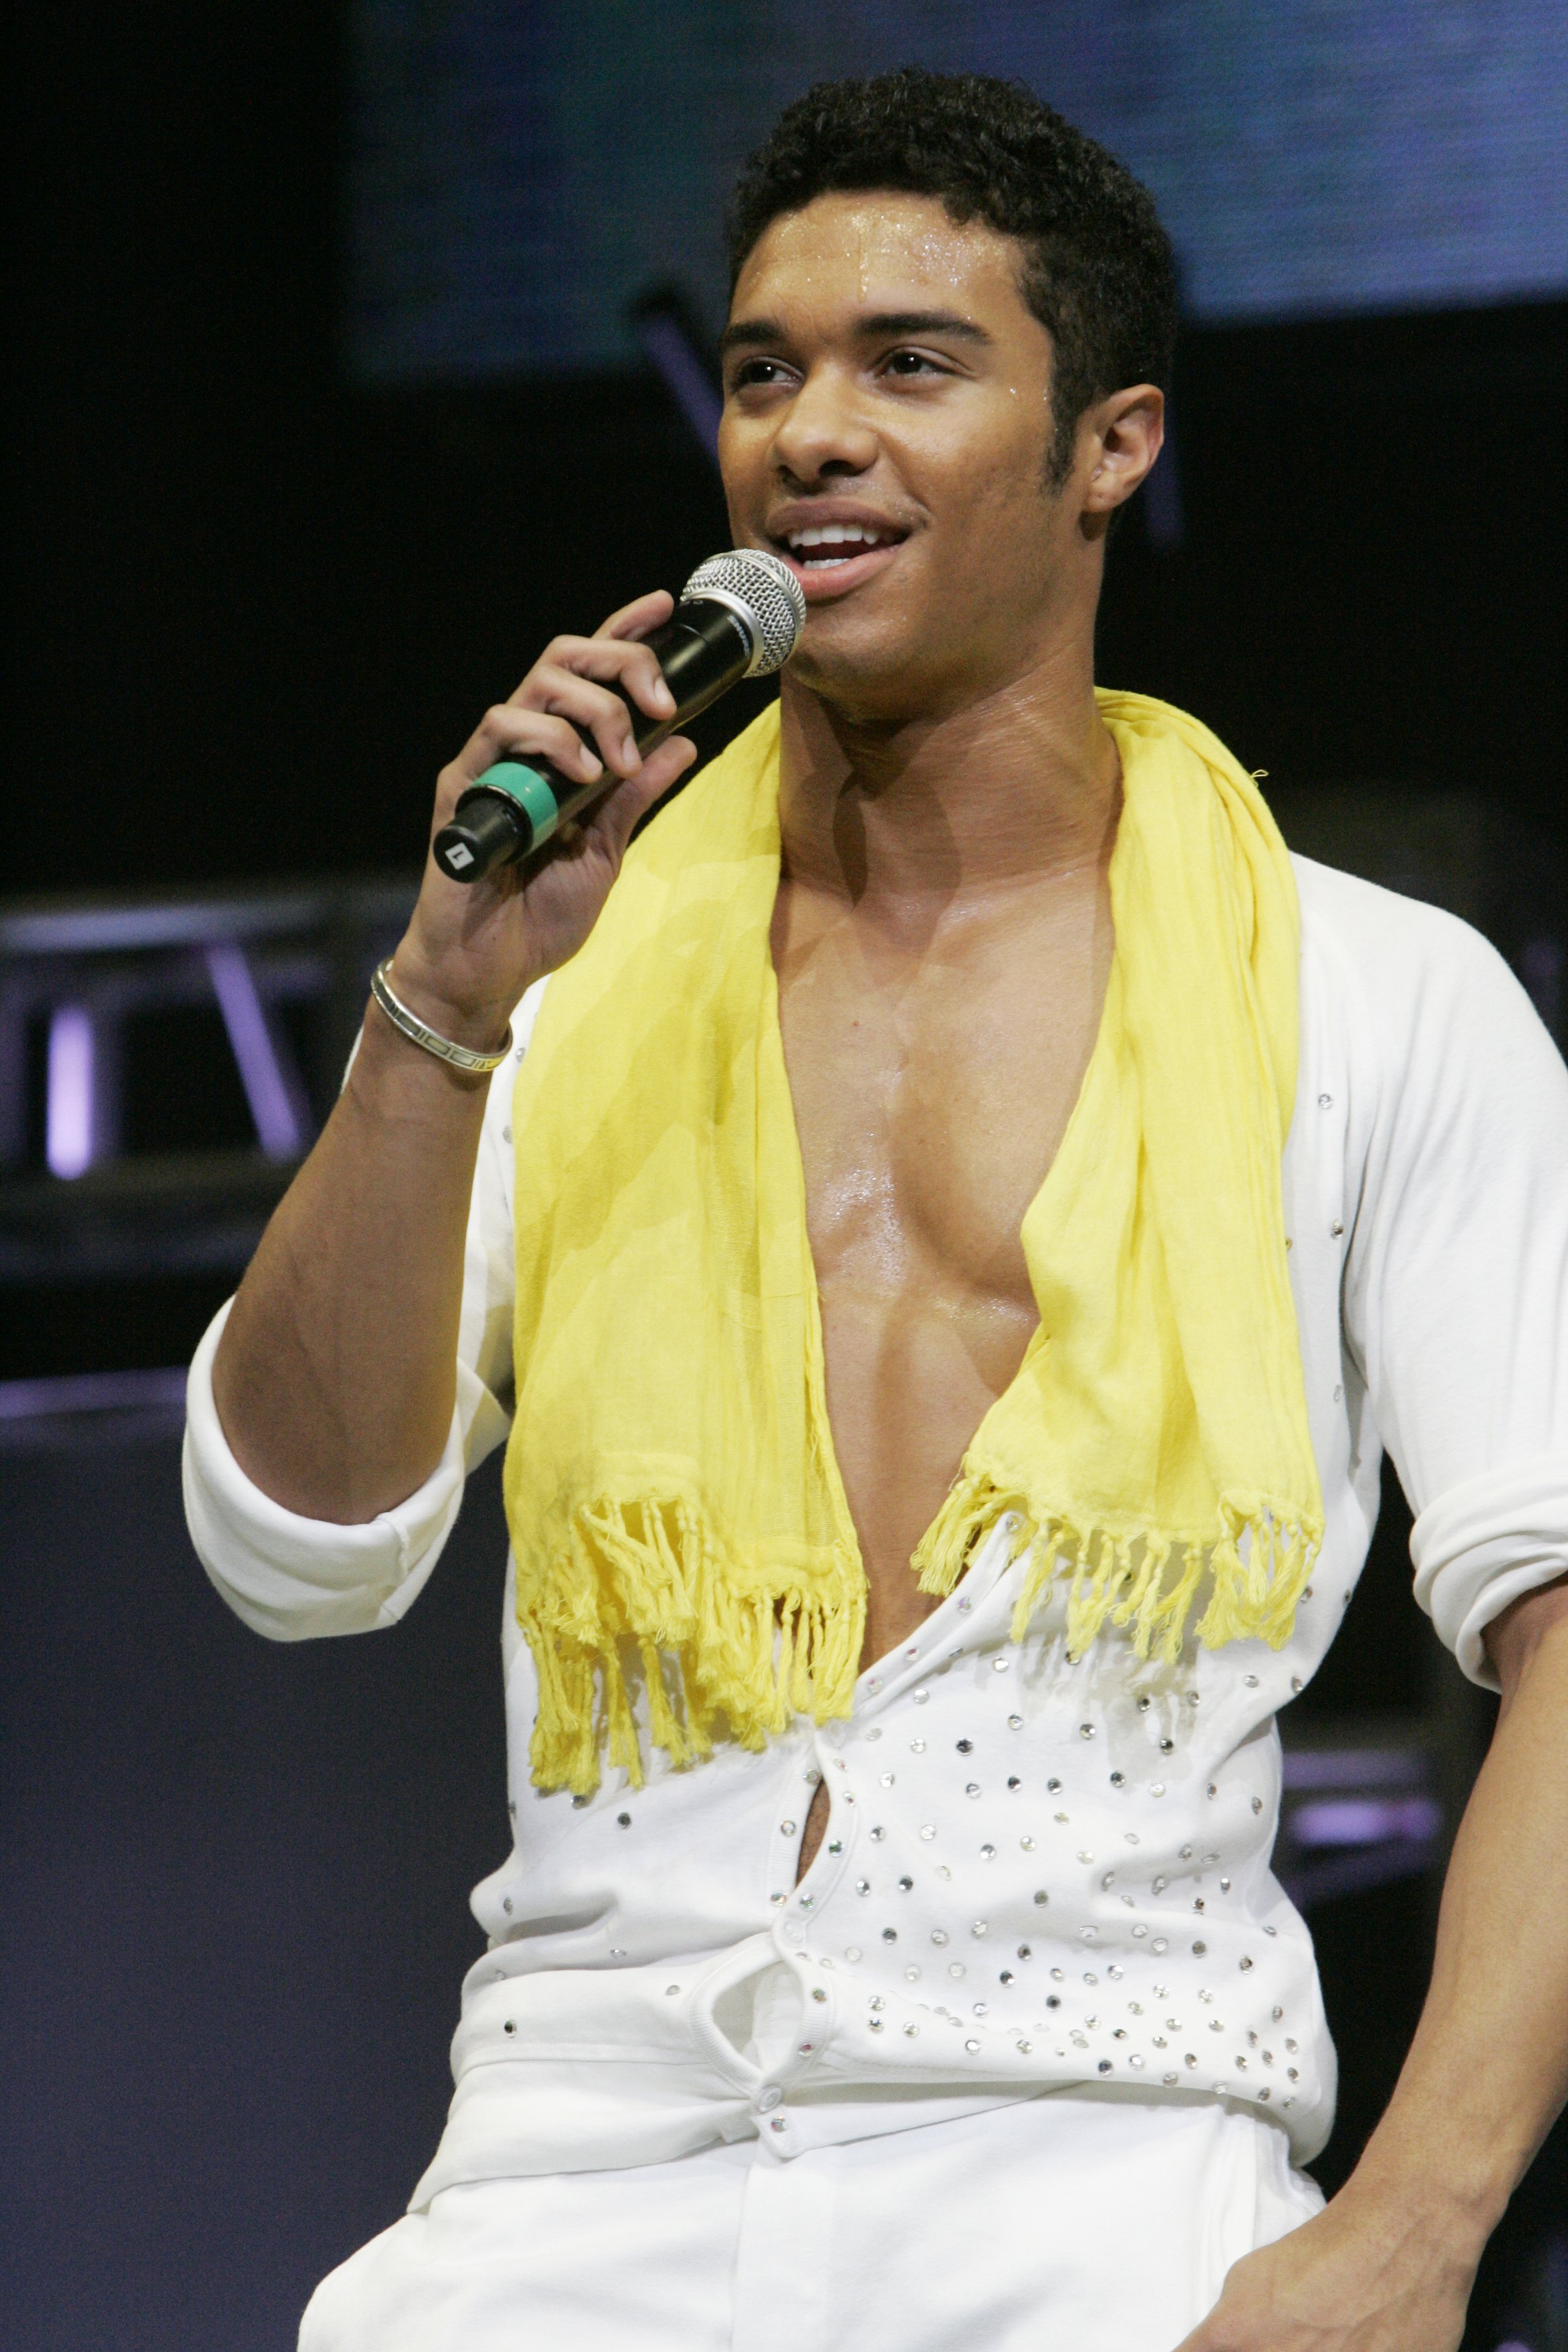 Danny Tidwell from "So You Think You Can Dance" performing live with nine other finalists at the Rose Garden arena in Portland, Oregon | Photo: Chris Ryan/Corbis via Getty Images